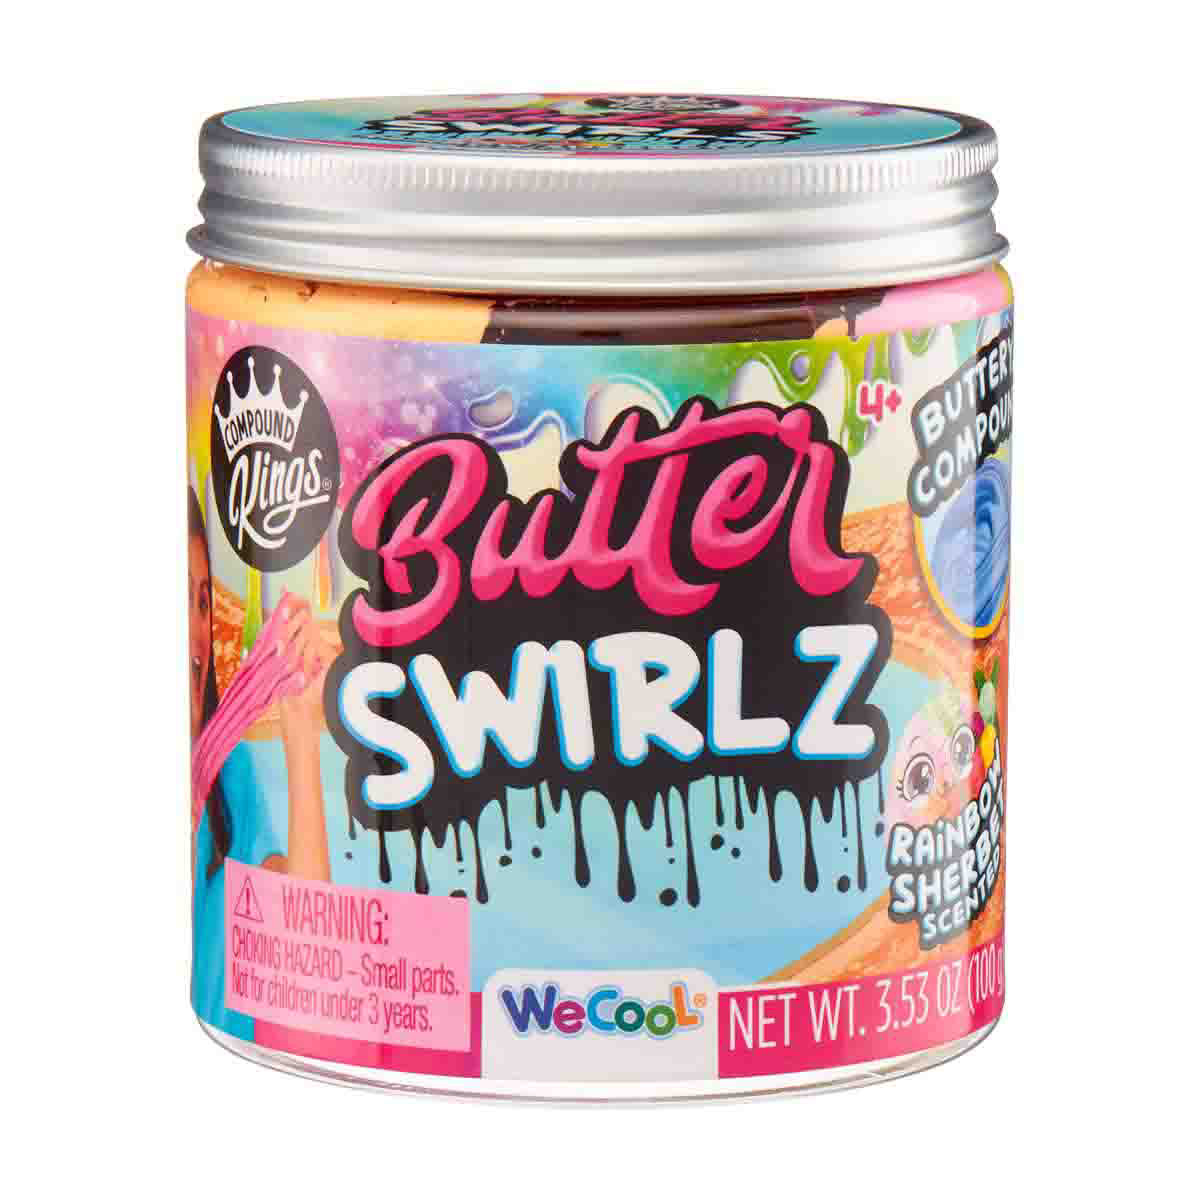 Compound Kings Butter Swirlz Scented Slime Jar, 3.53 oz